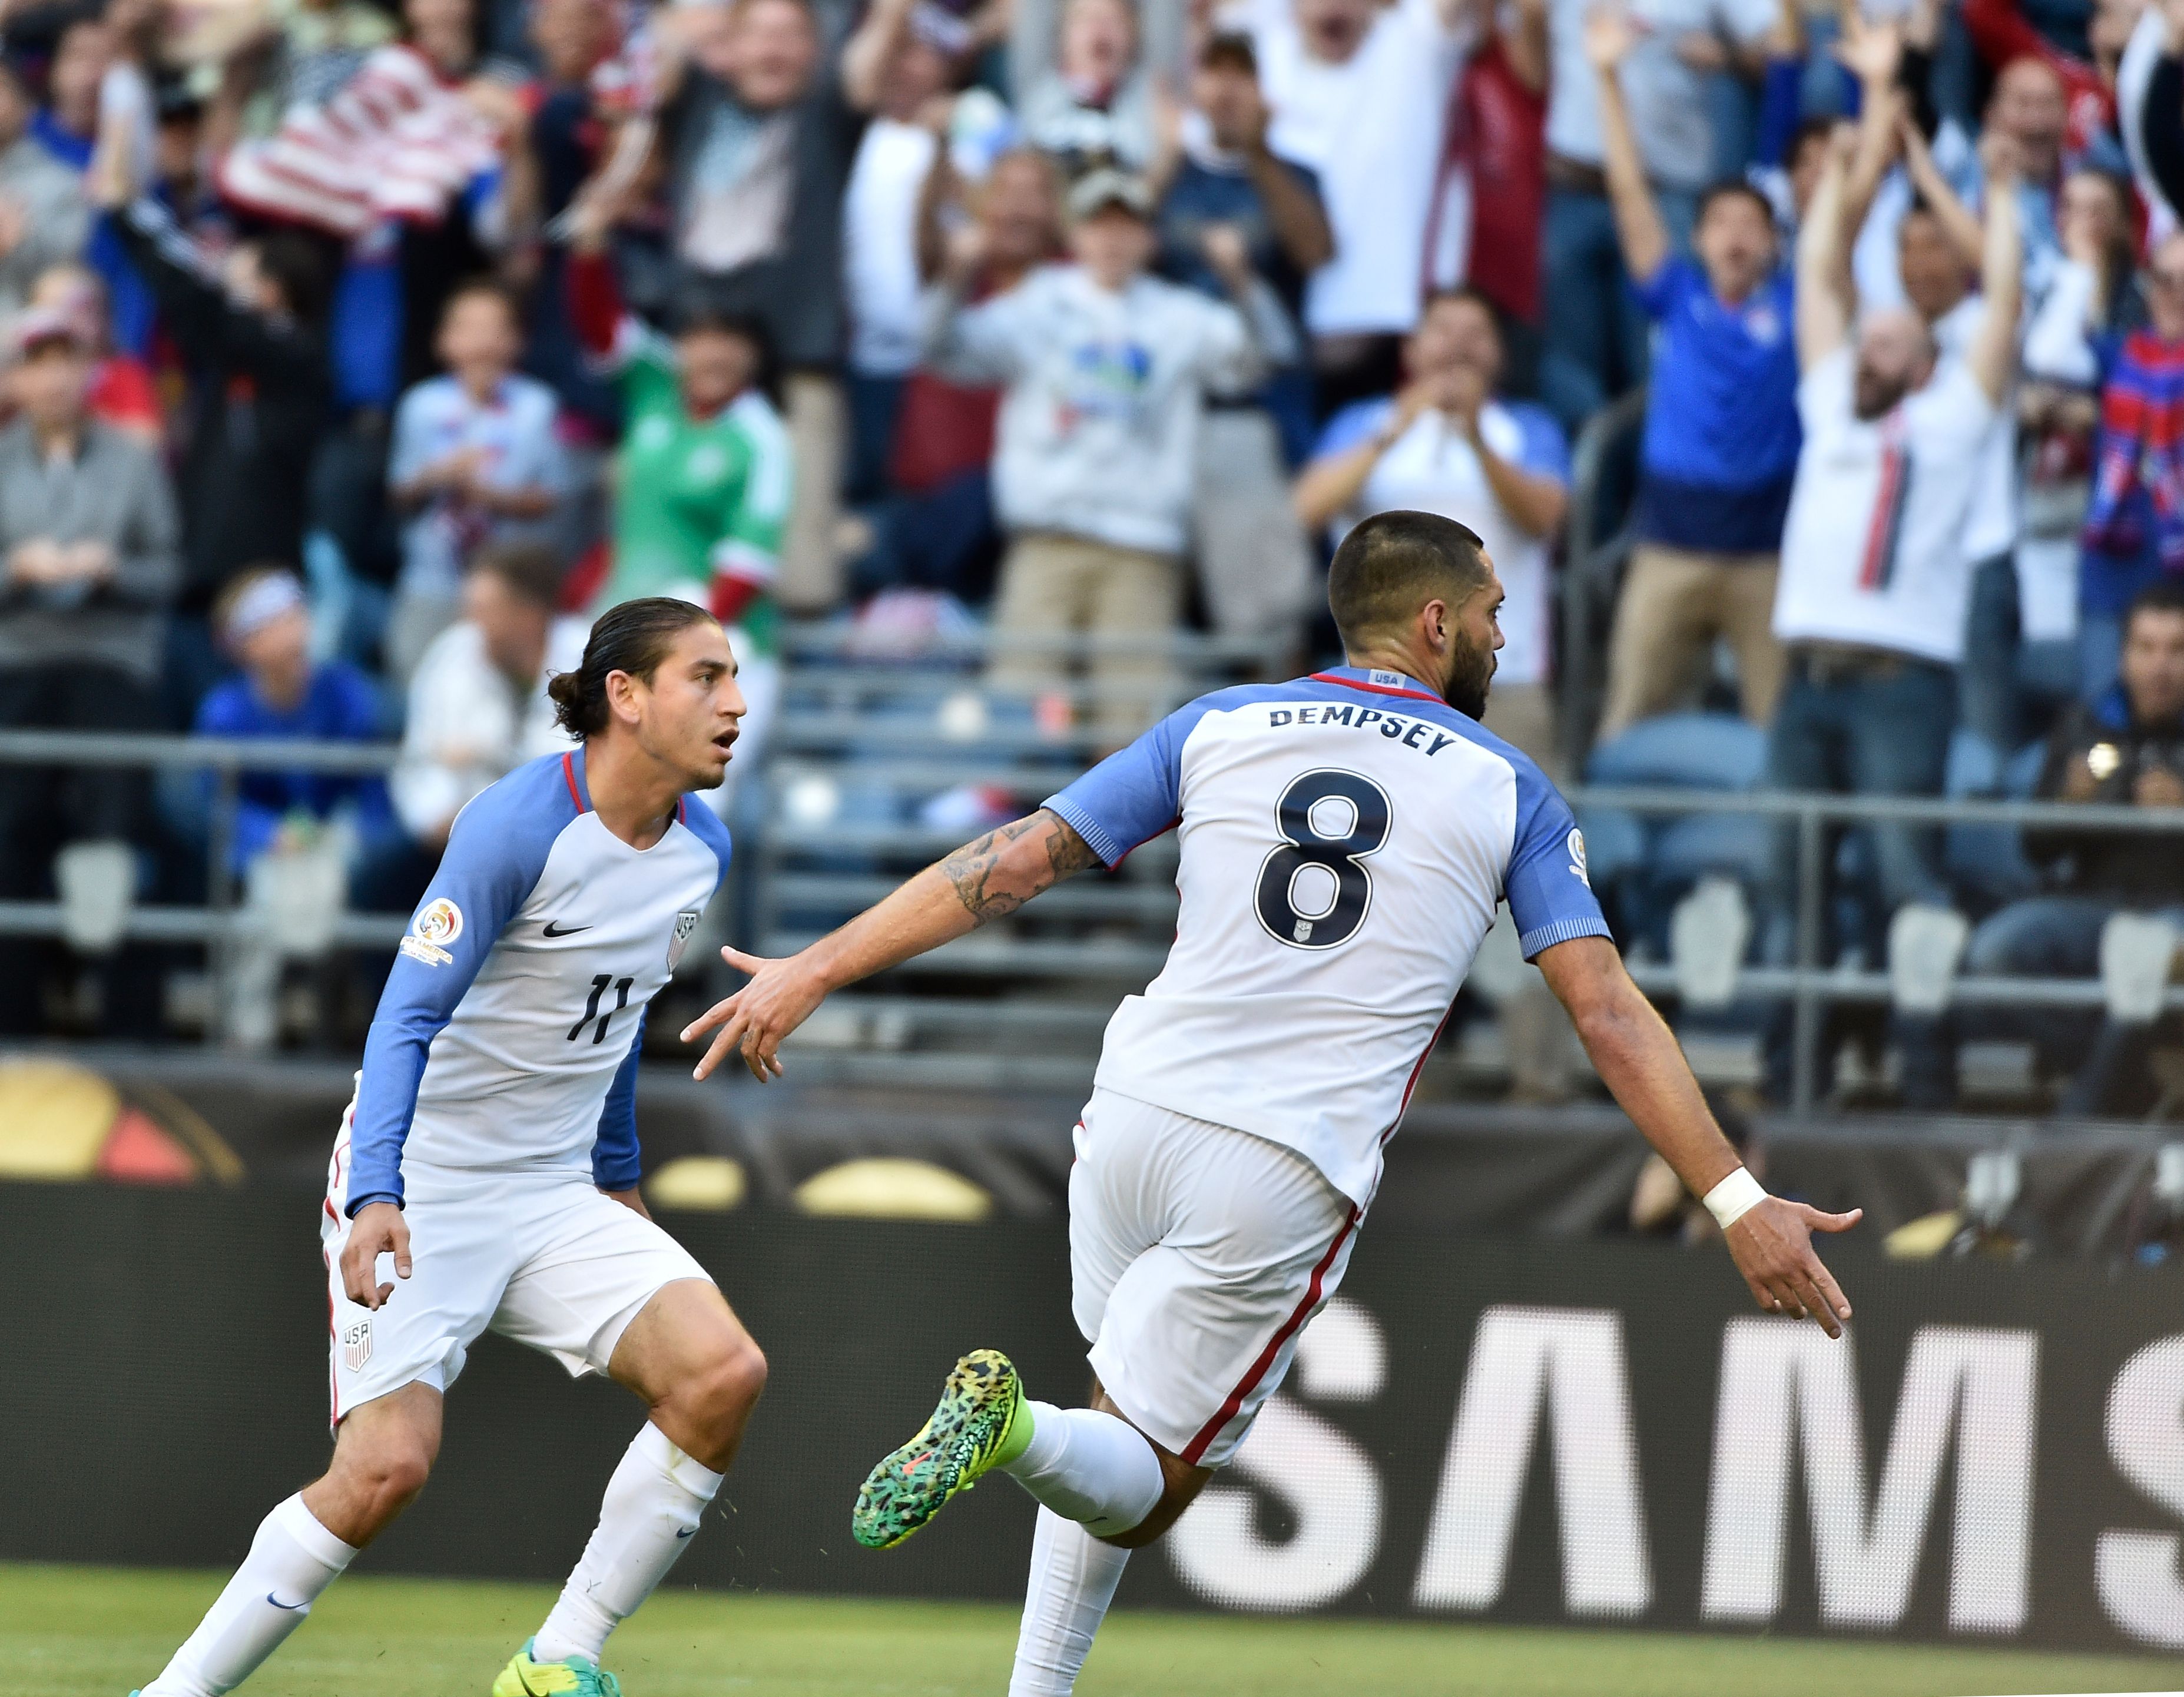 USA's Clint Dempsey (R) celebrates after scoring against Ecuador during their Copa America Centenario football tournament quarterfinal match, in Seattle, Washington, United States, on June 16, 2016.  / AFP / Omar Torres        (Photo credit should read OMAR TORRES/AFP/Getty Images)